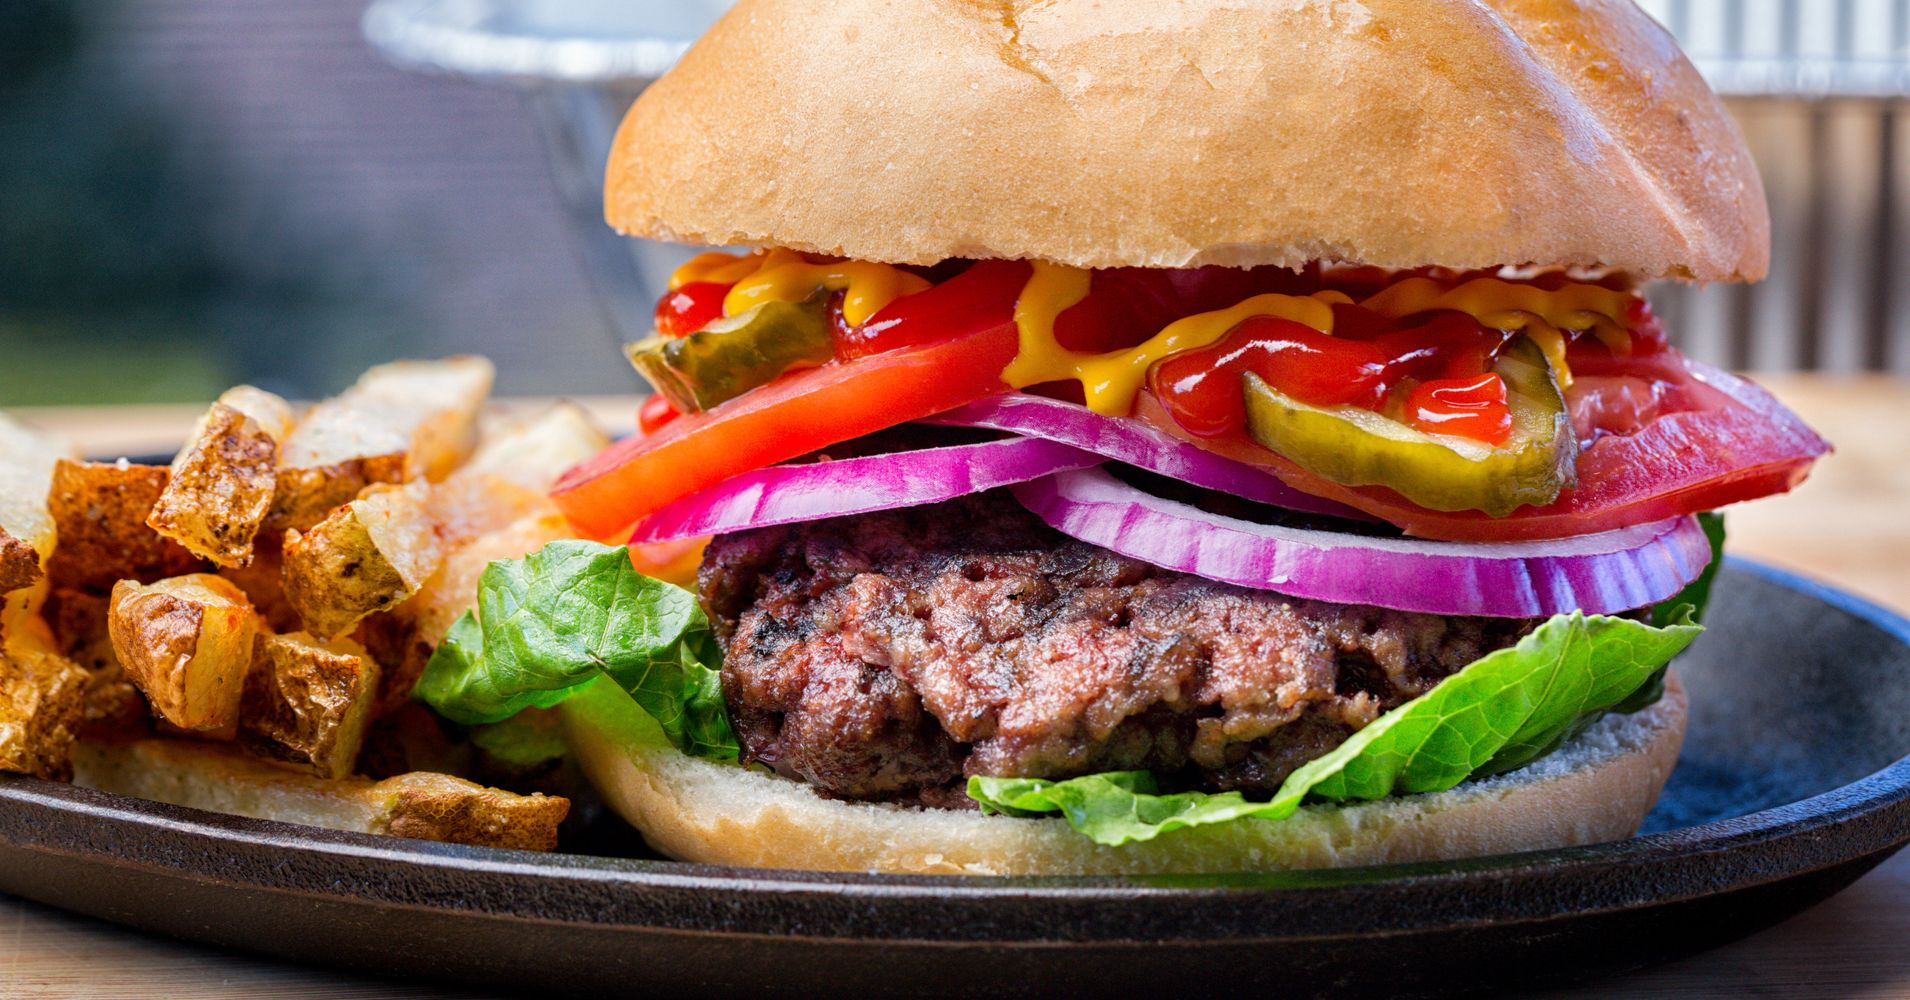 Restaurant Meals Are Just As Unhealthy As Fast Food | HuffPost Life